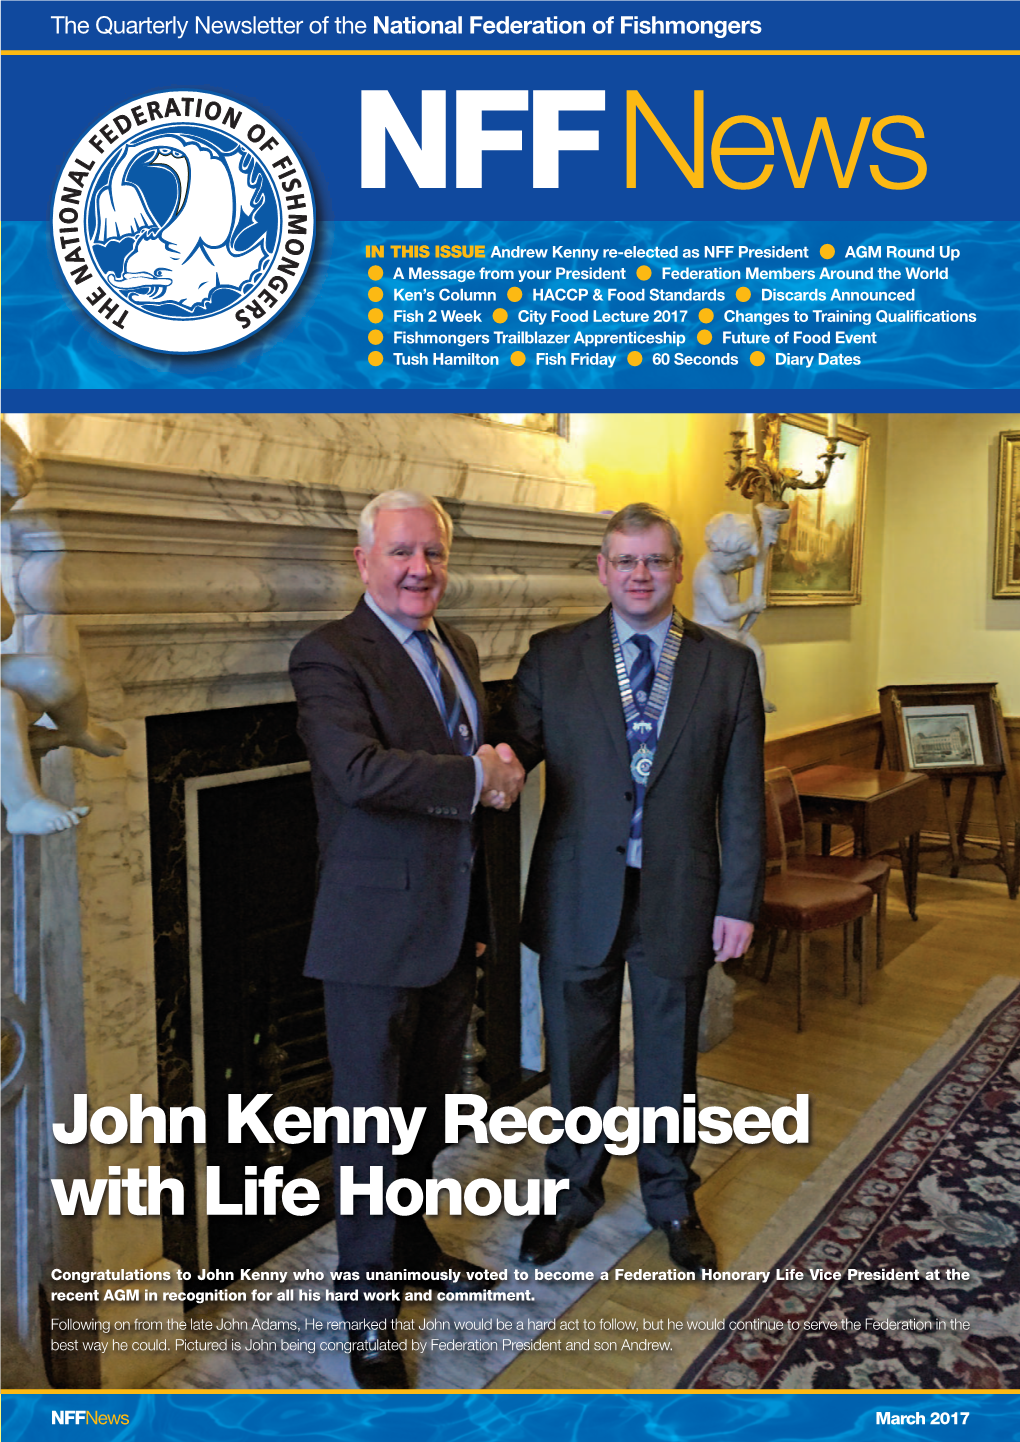 John Kenny Recognised with Life Honour